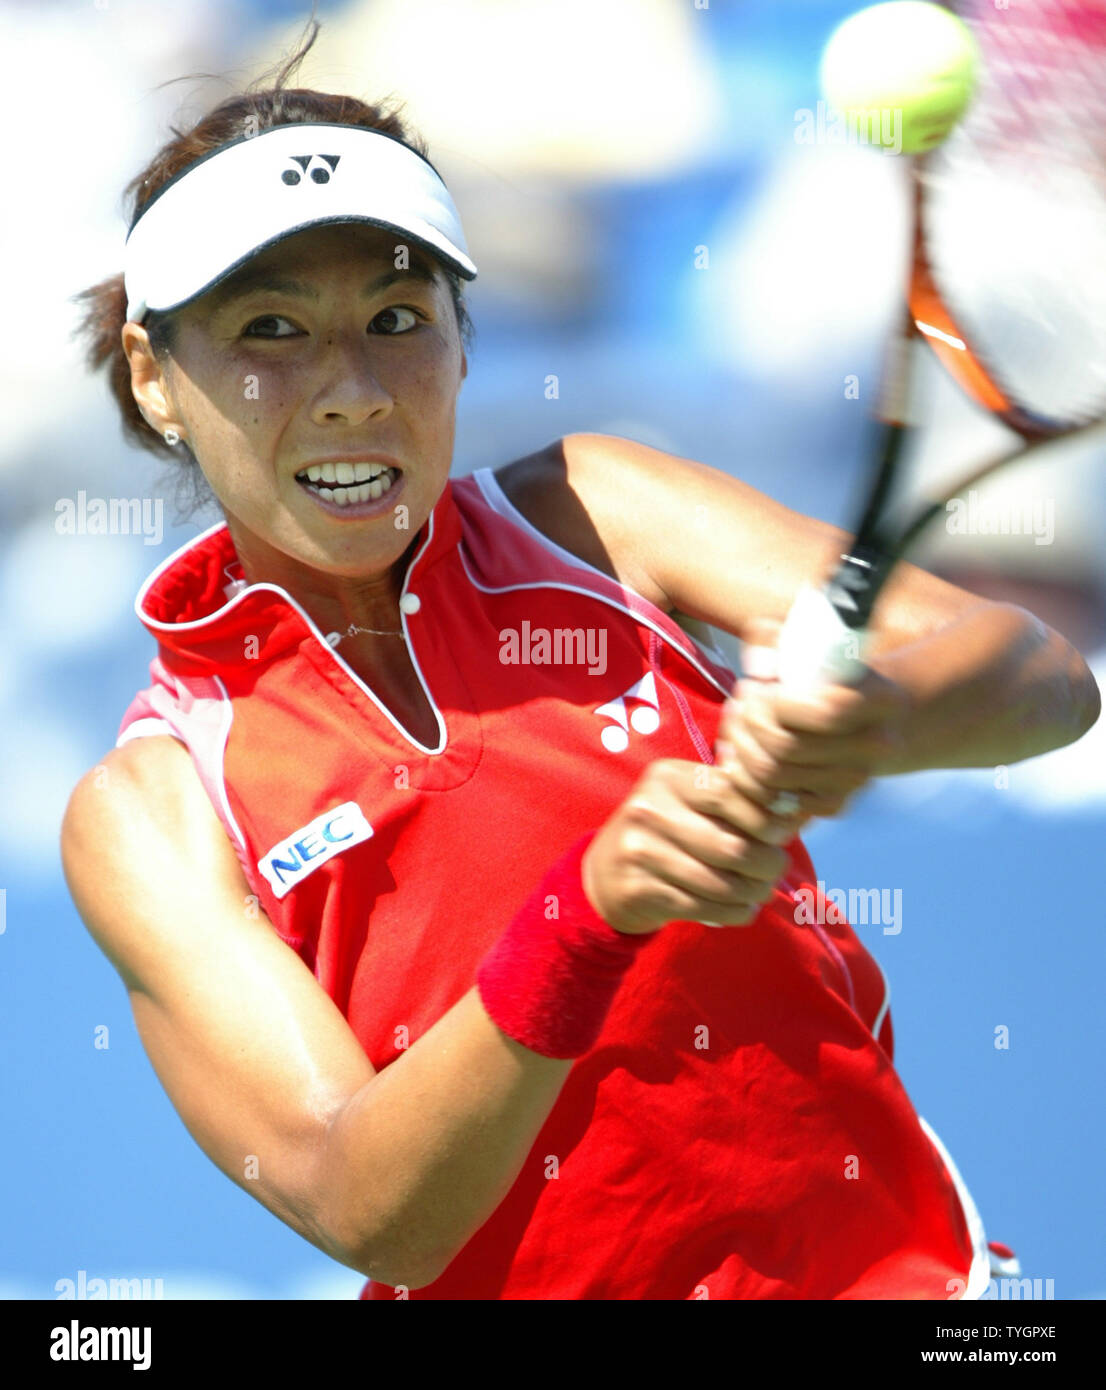 Shinobu Asagoe (JPN) hits a backhand during her defeat of Eleni Daniilidou (GRE) in 3 sets during day 8 action at the US Open in Flushing, New York on September 6, 2004.    (UPI Photo/John Angelillo) Stock Photo